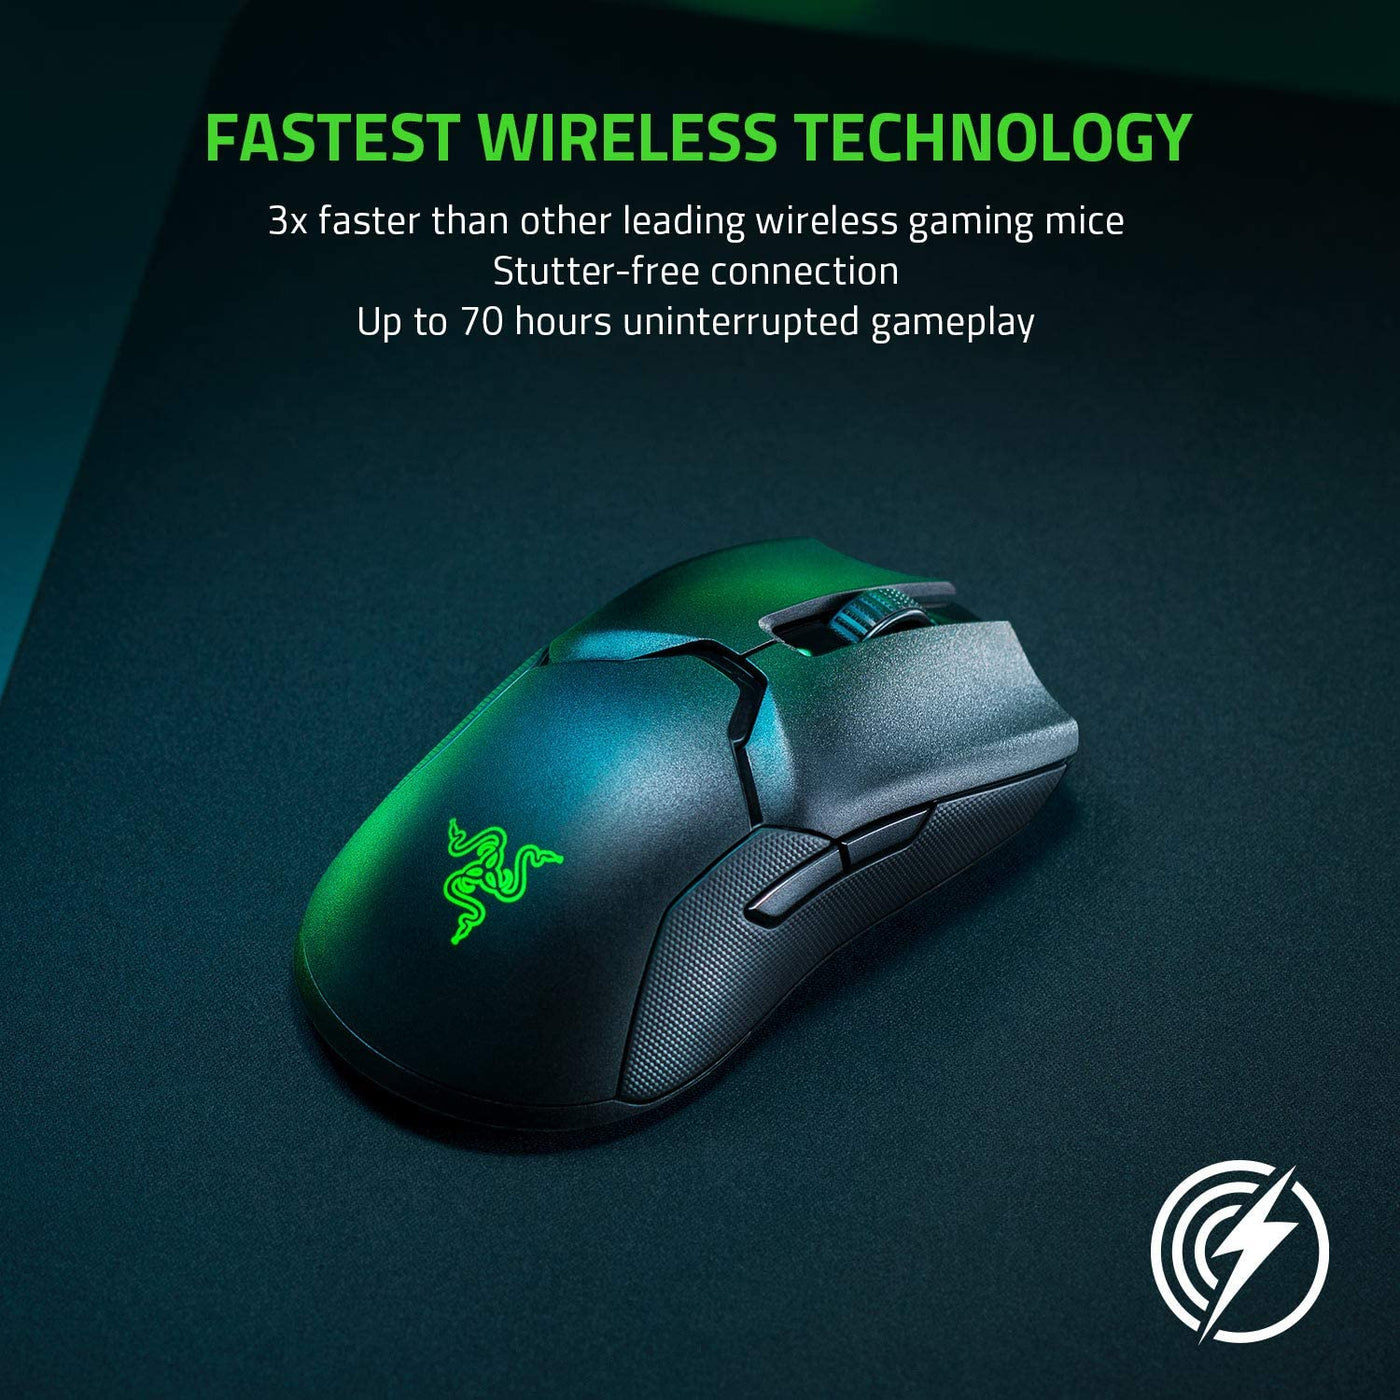 Mouse Razer Viper Ultimate Inalambrico Hyperspeed Focus+